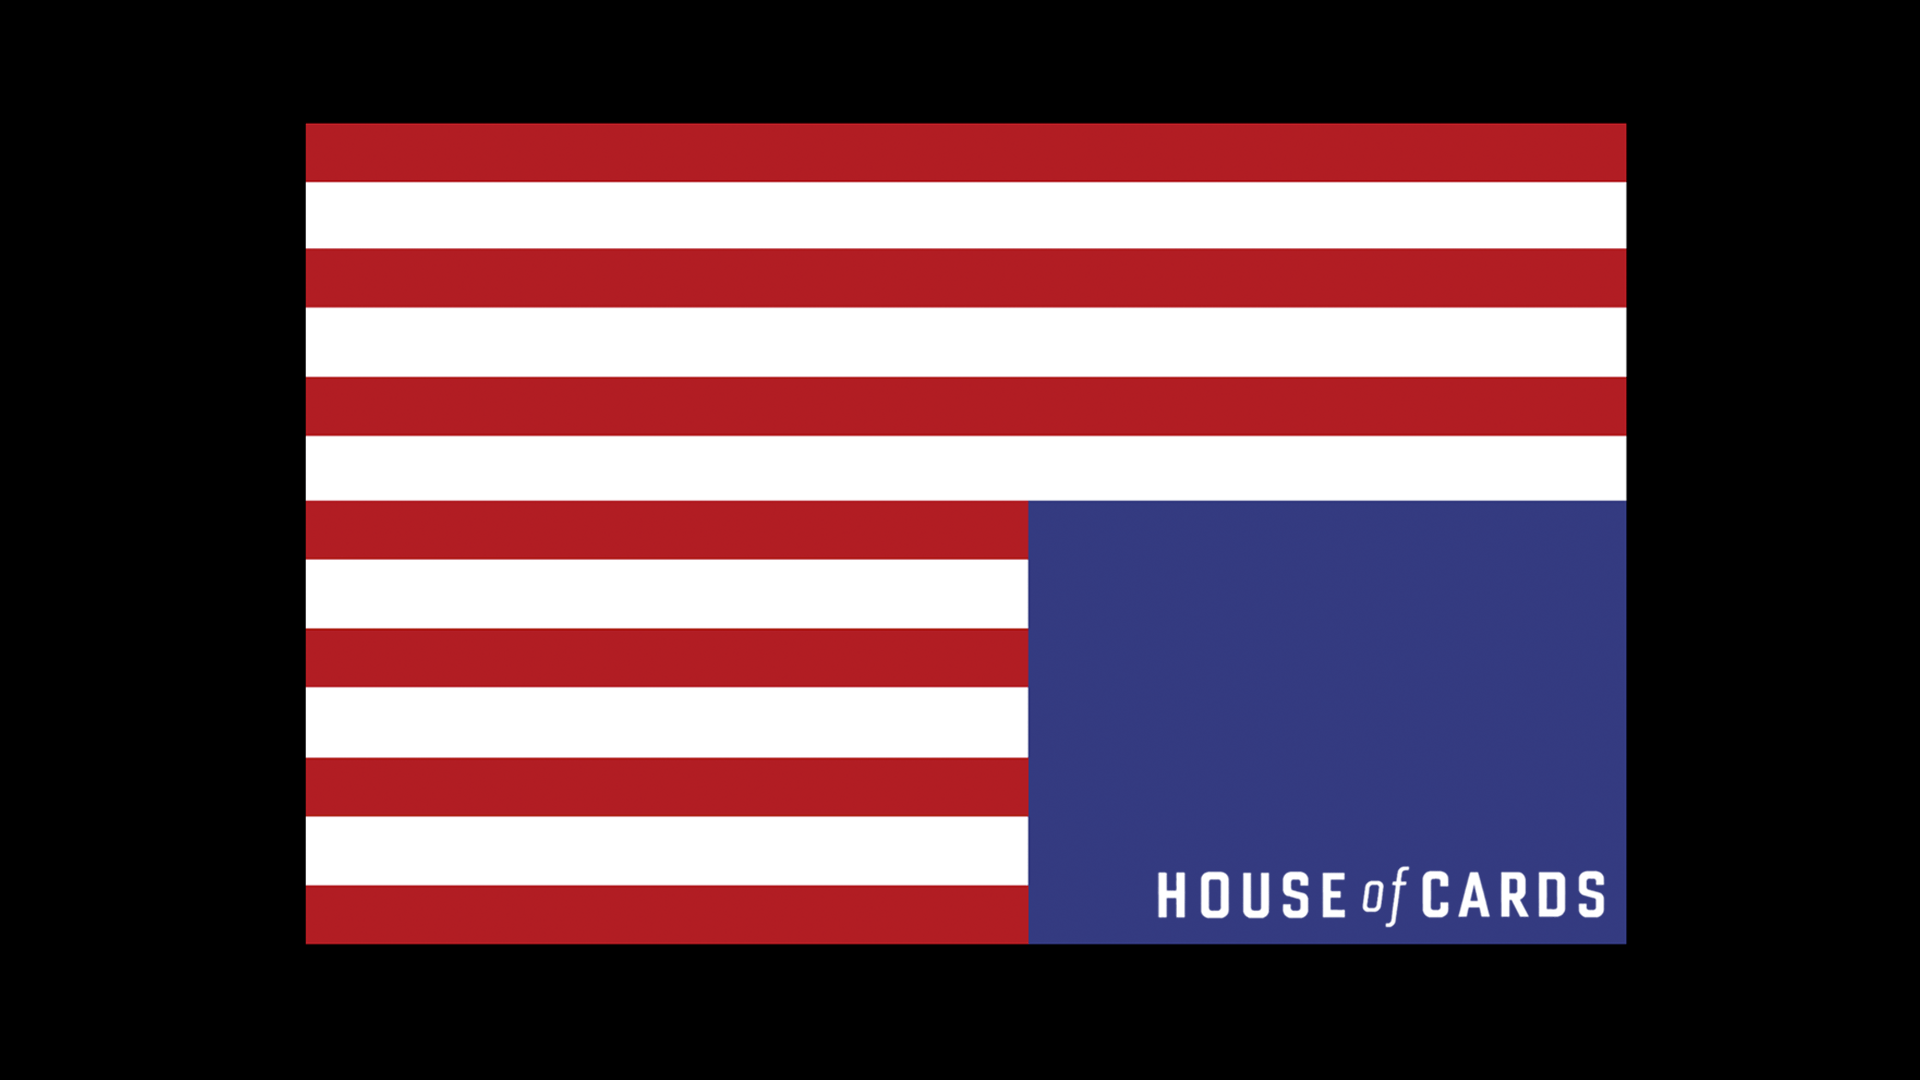 Minimalistic House of Cards Wallpapers HouseOfCards